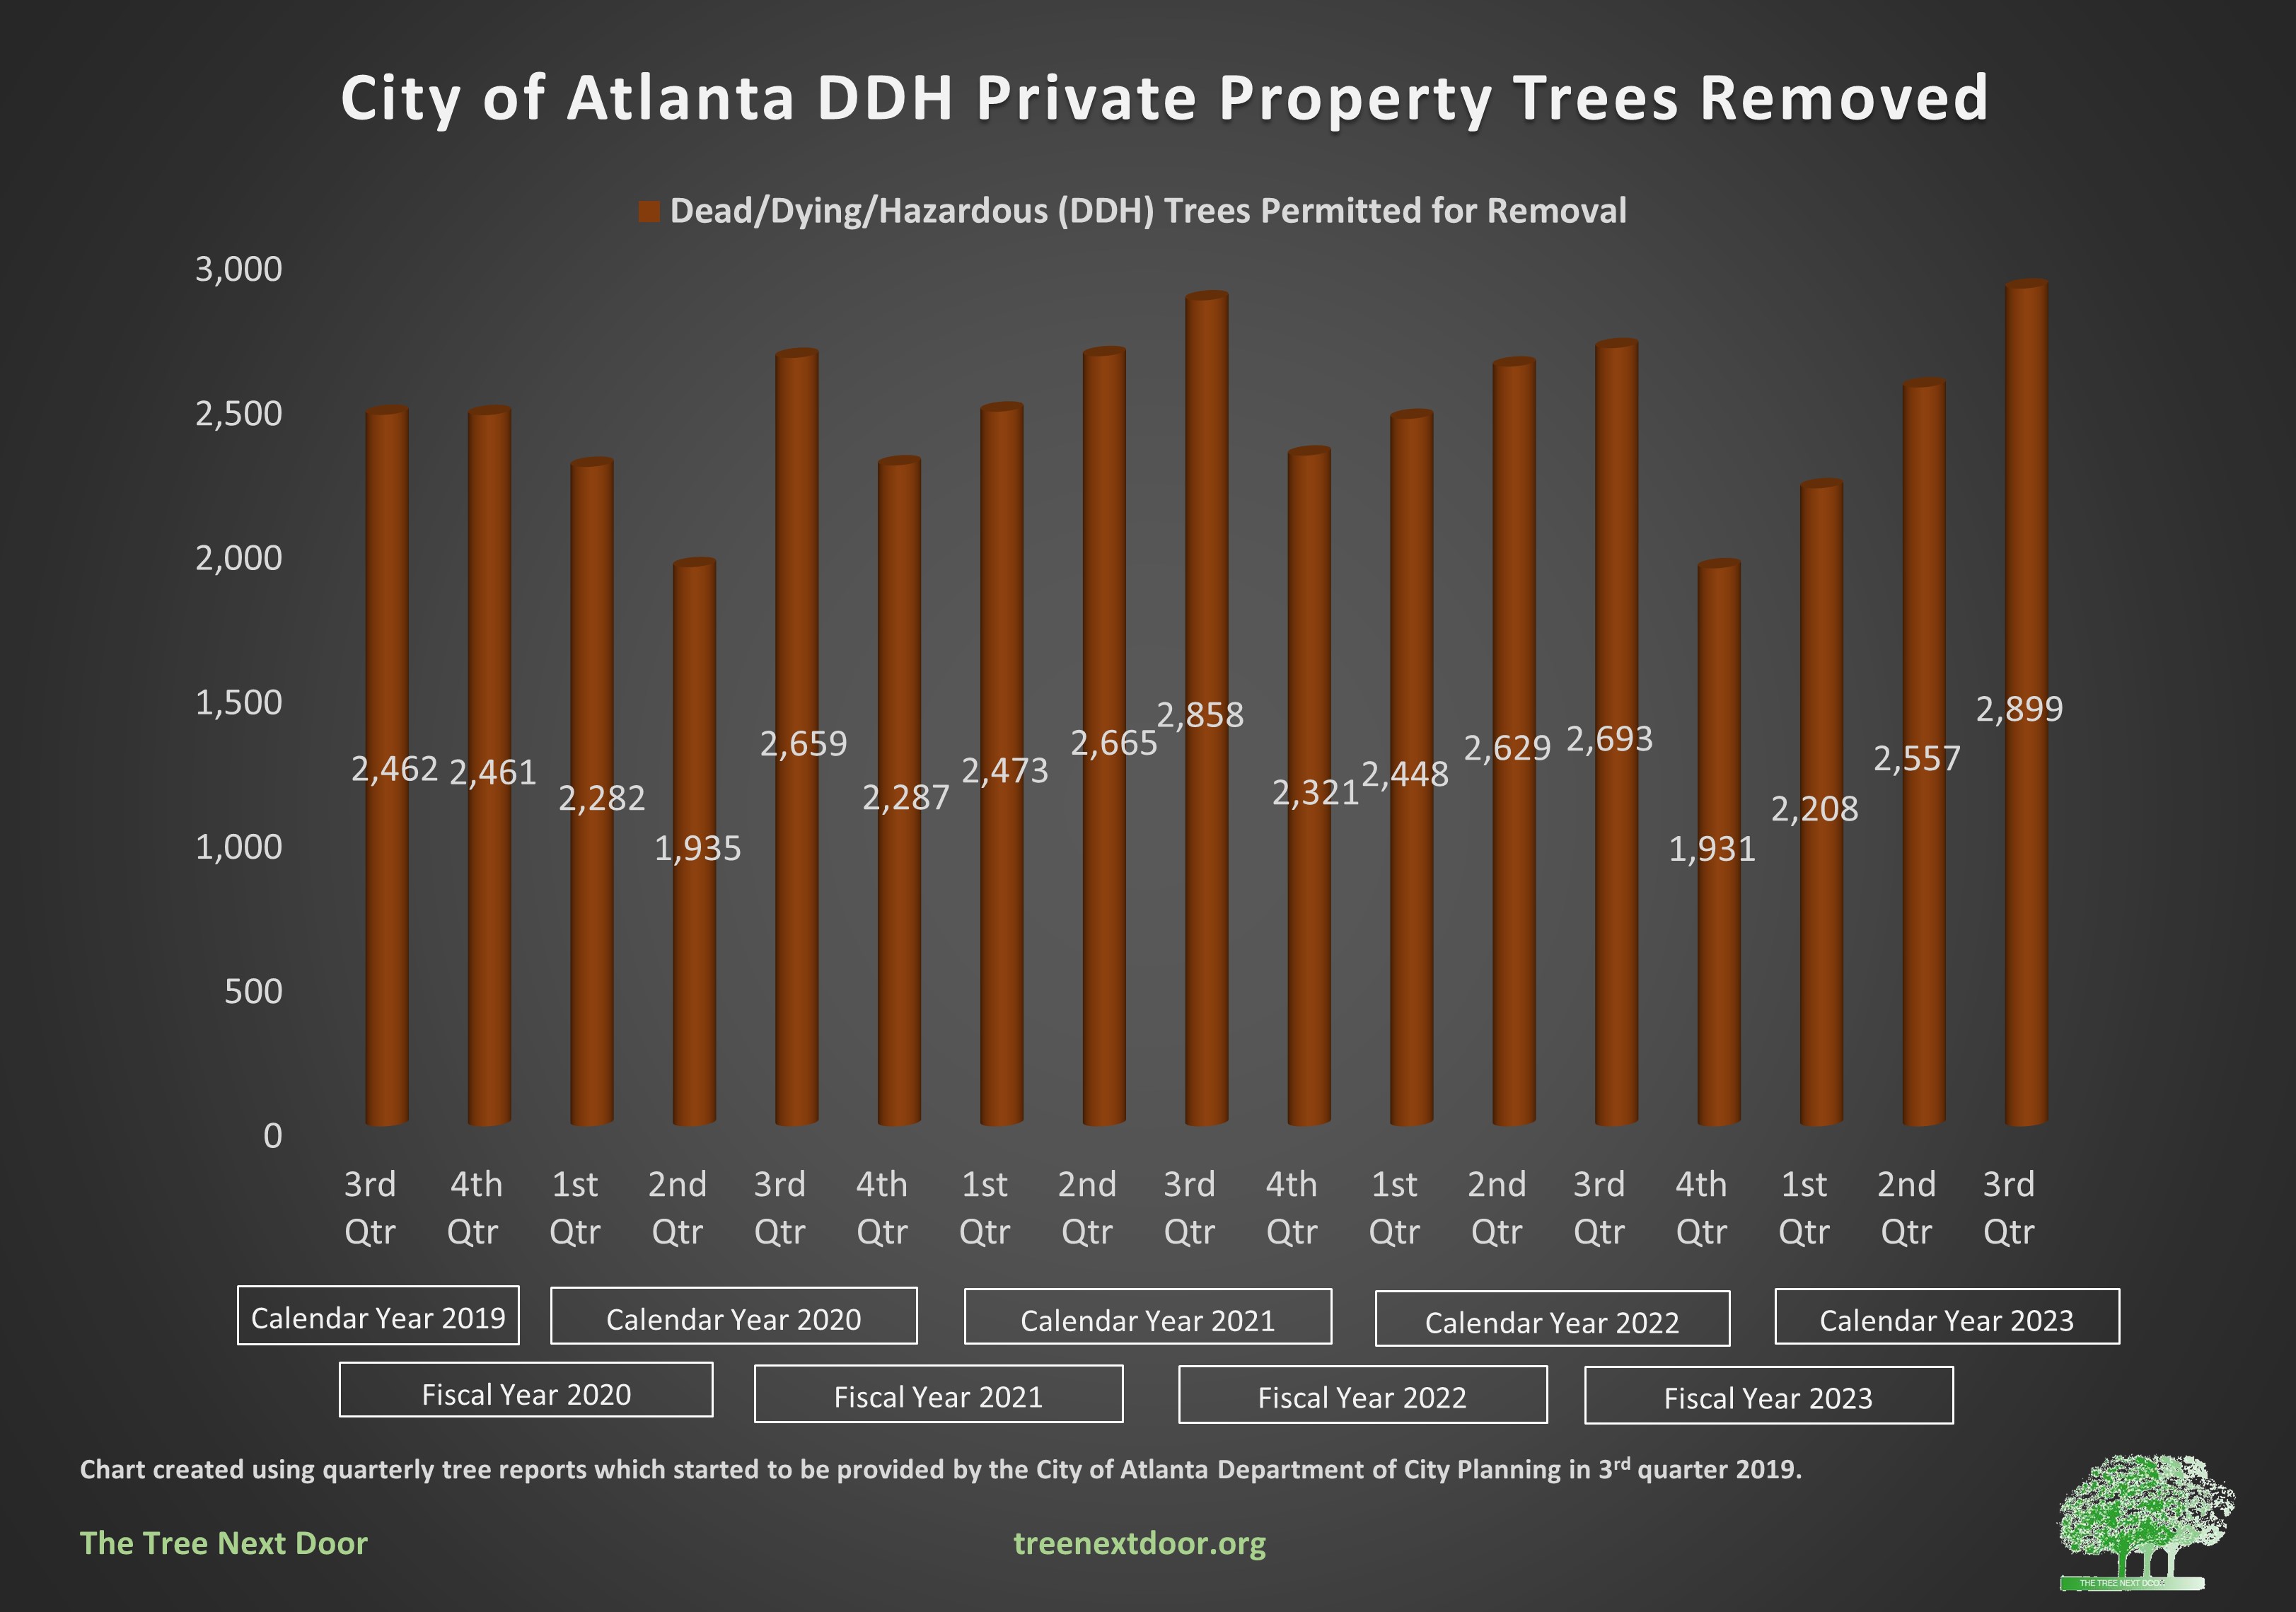 ddh_private_property_trees_removed_no_covid_line.jpg